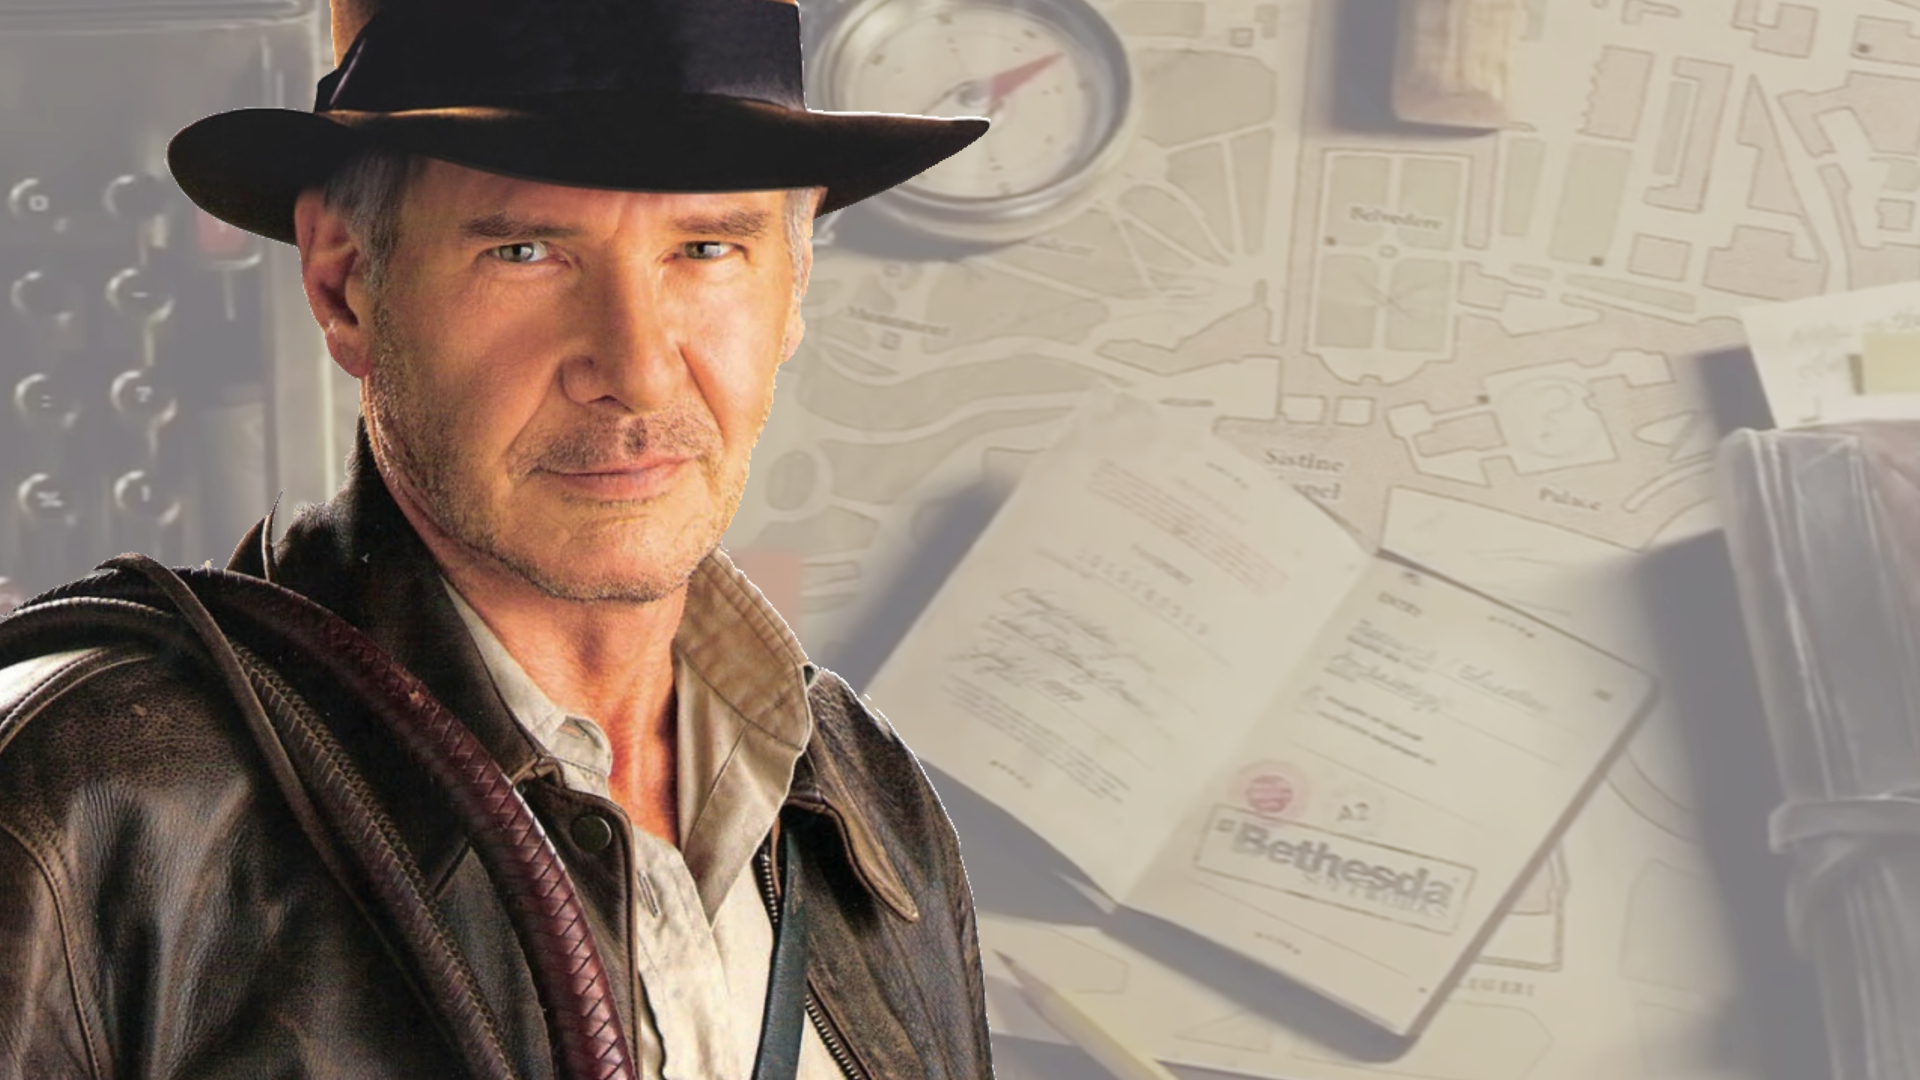 Indiana Jones game in the works Bethesda, here’s everything we know